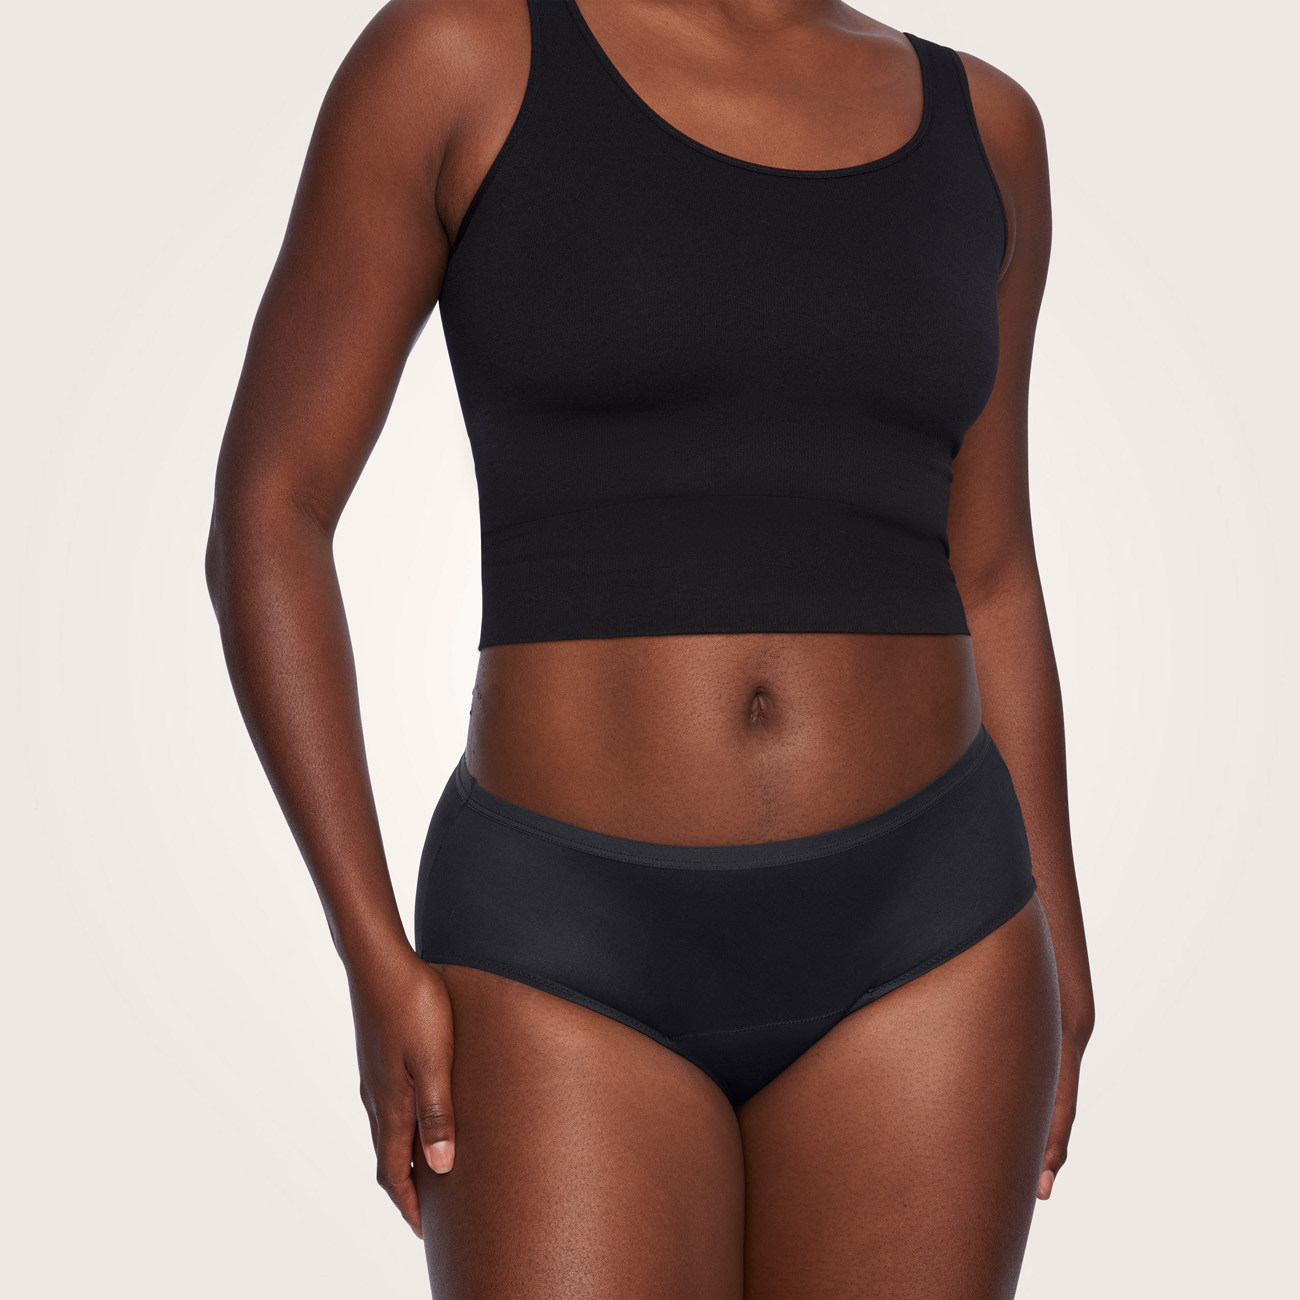 Thinx Offers Solutions to New Parents with Launch of Postpartum